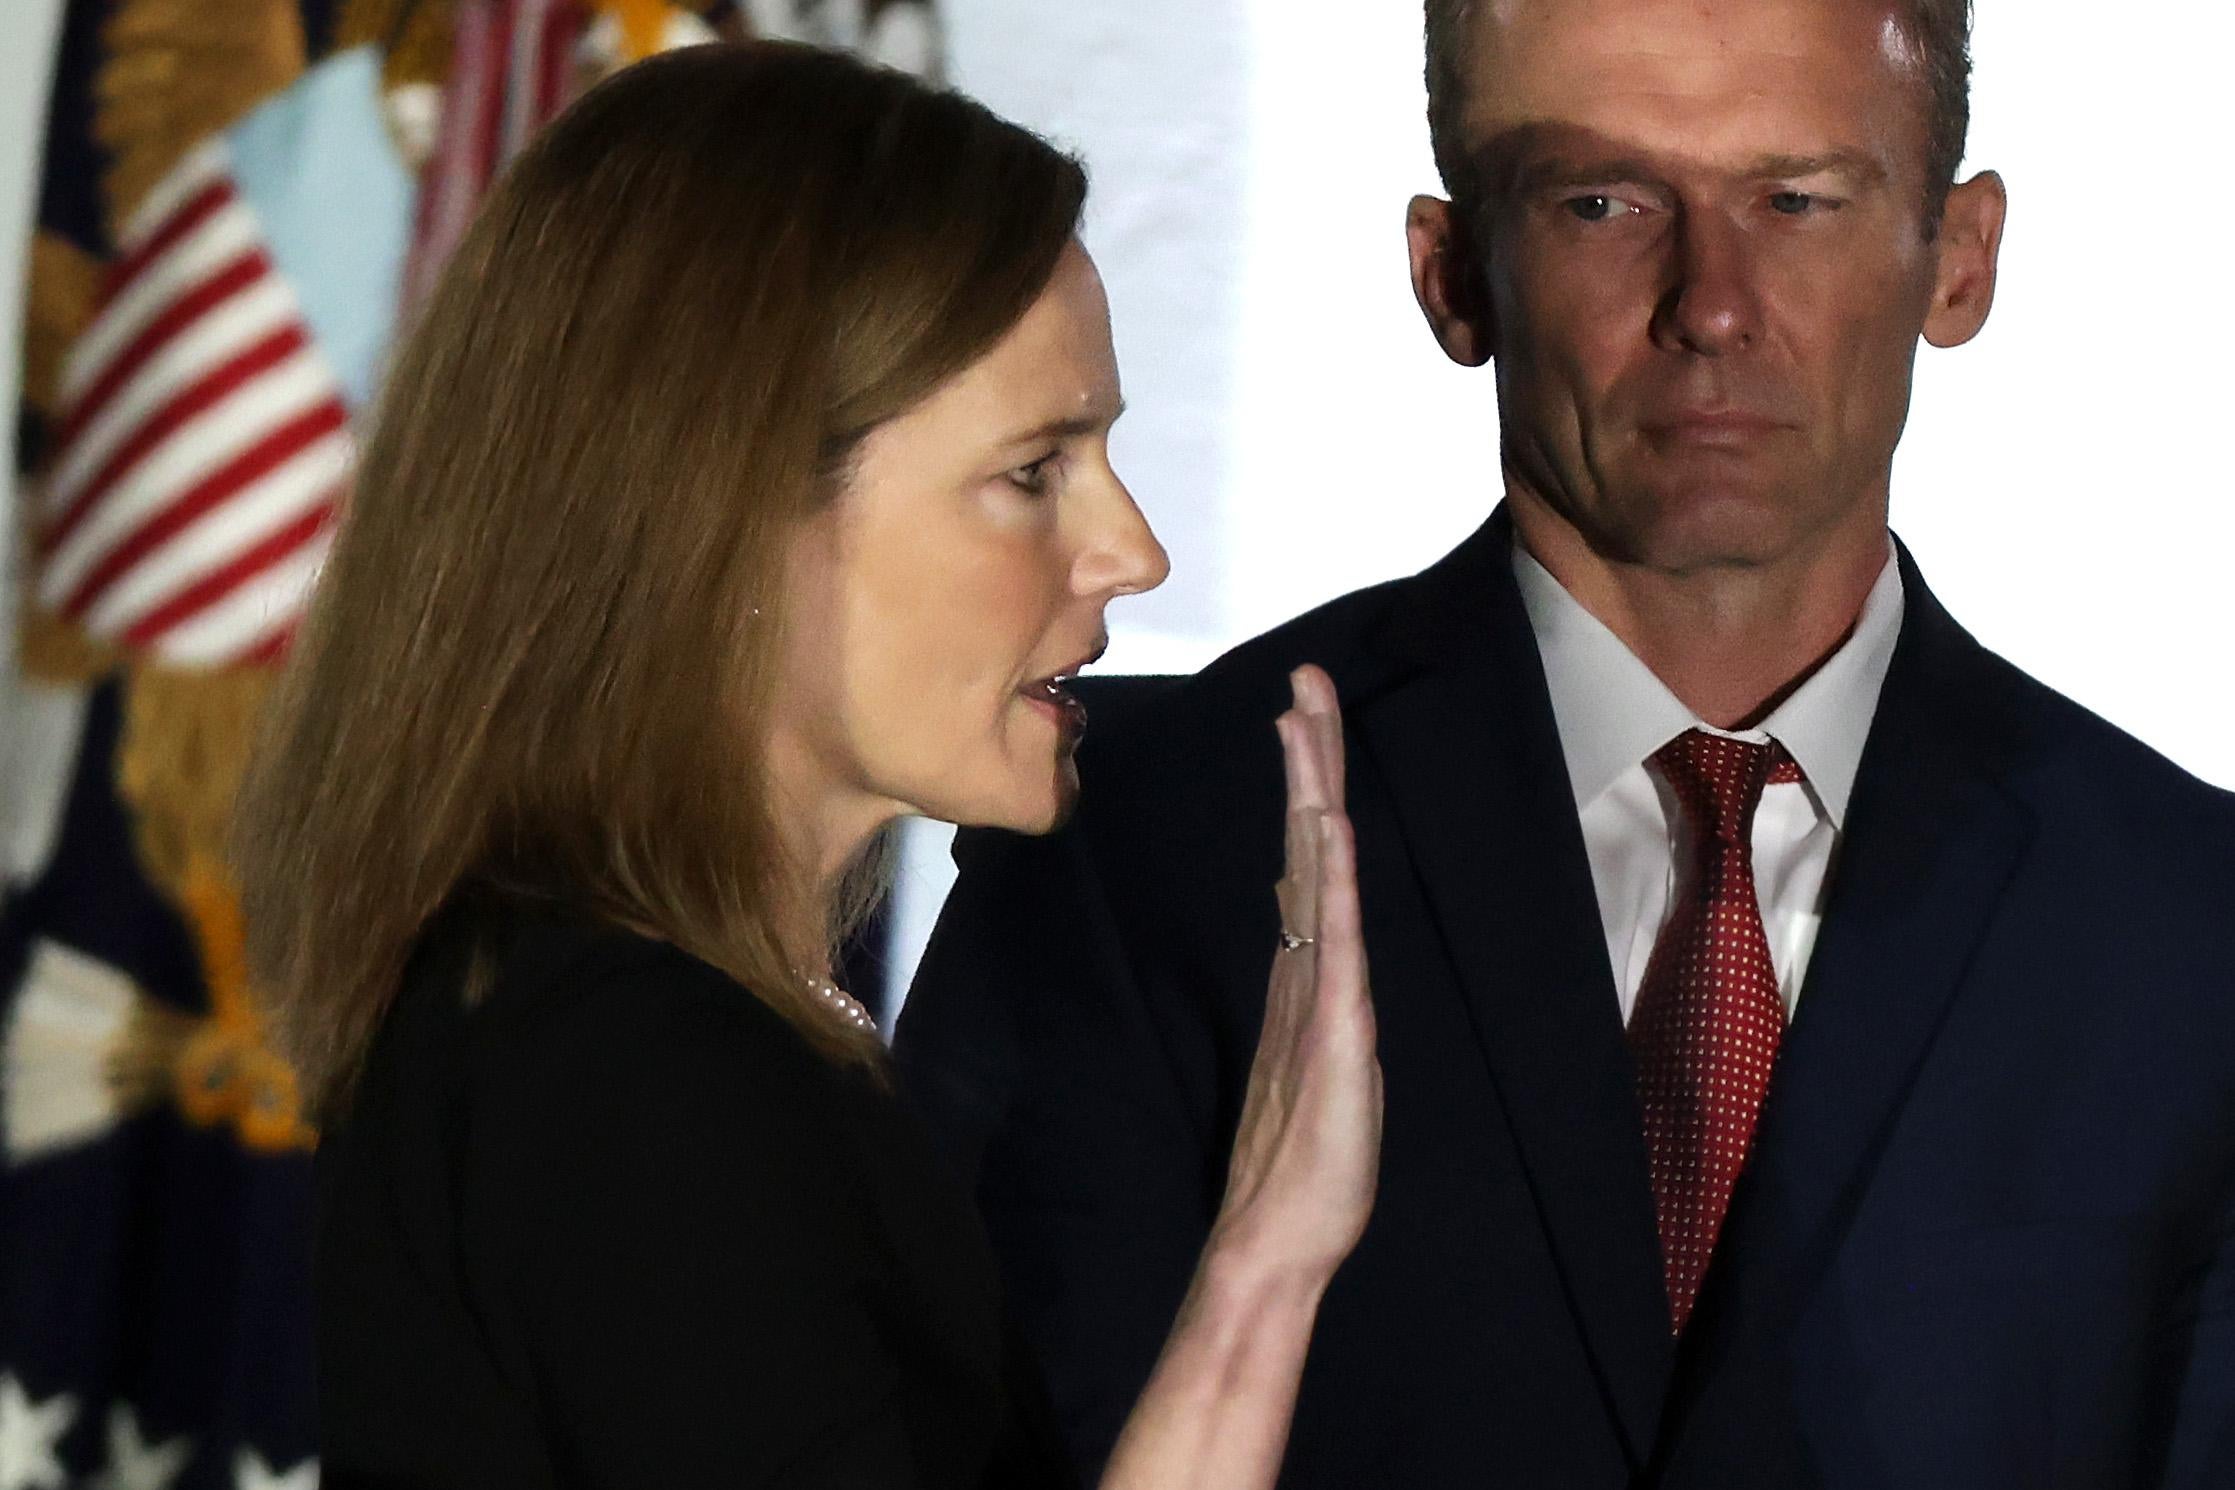 Amy Coney Barrett holds up her right hand and takes the oath as her husband looks on